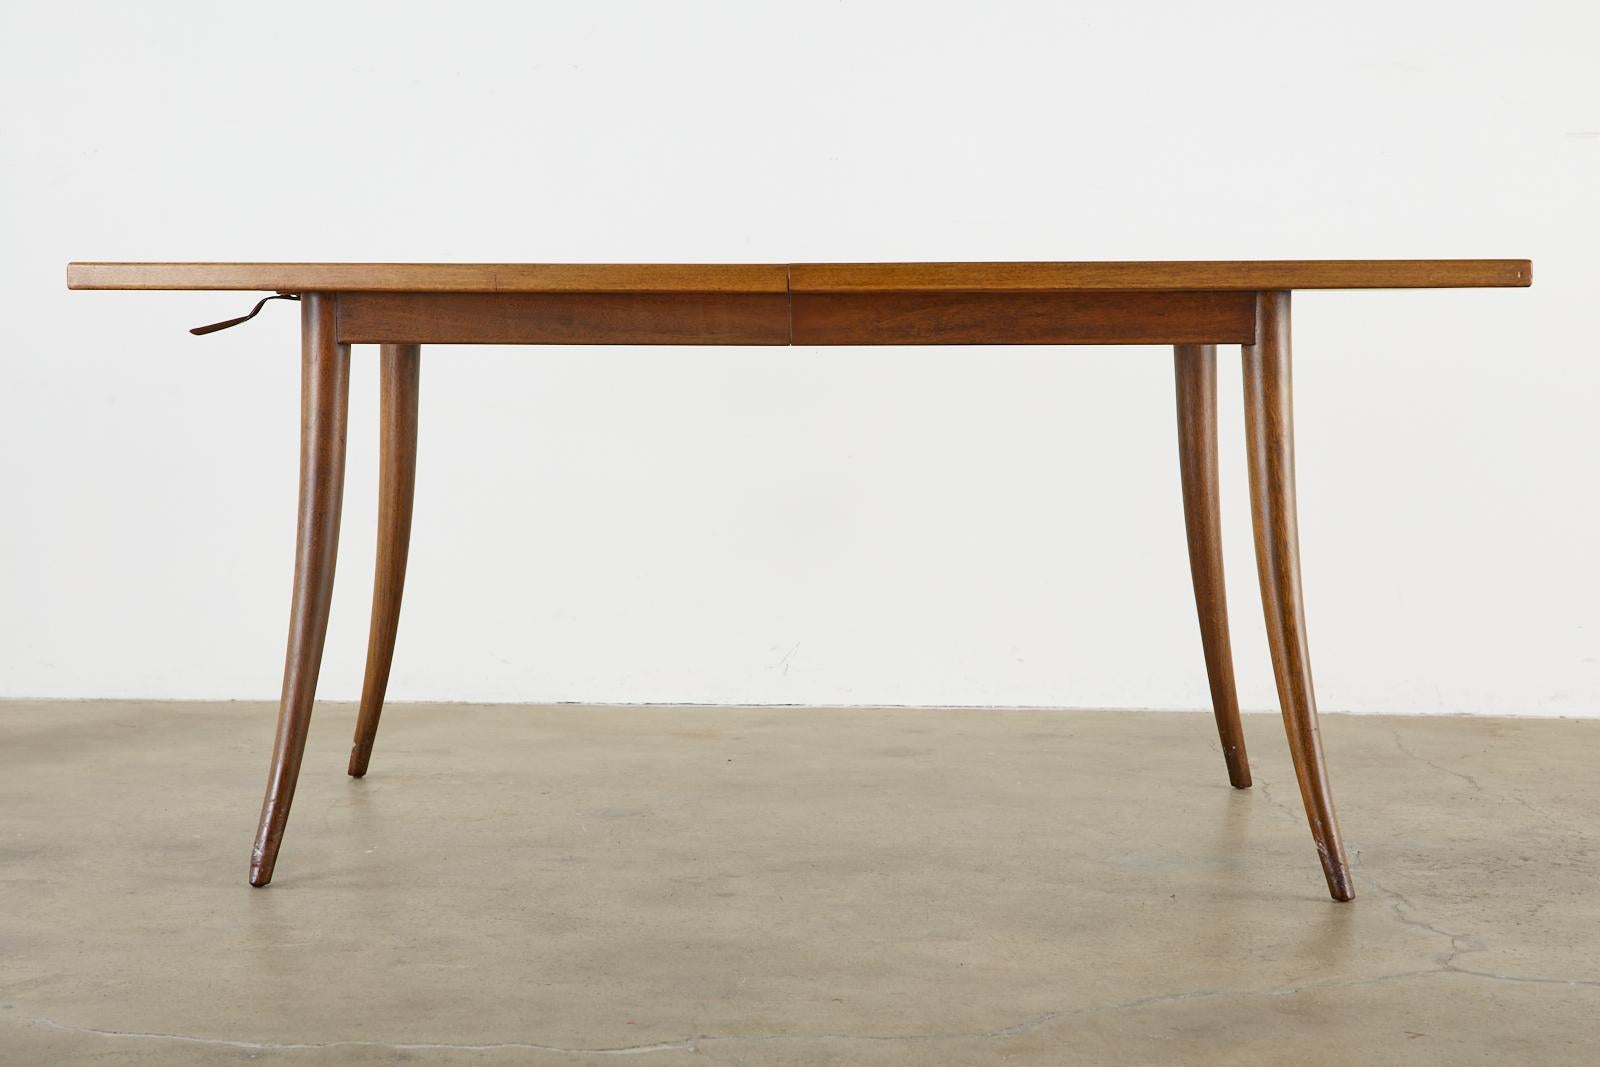 20th Century Harvey Probber Midcentury Saber Leg Extension Dining Table For Sale